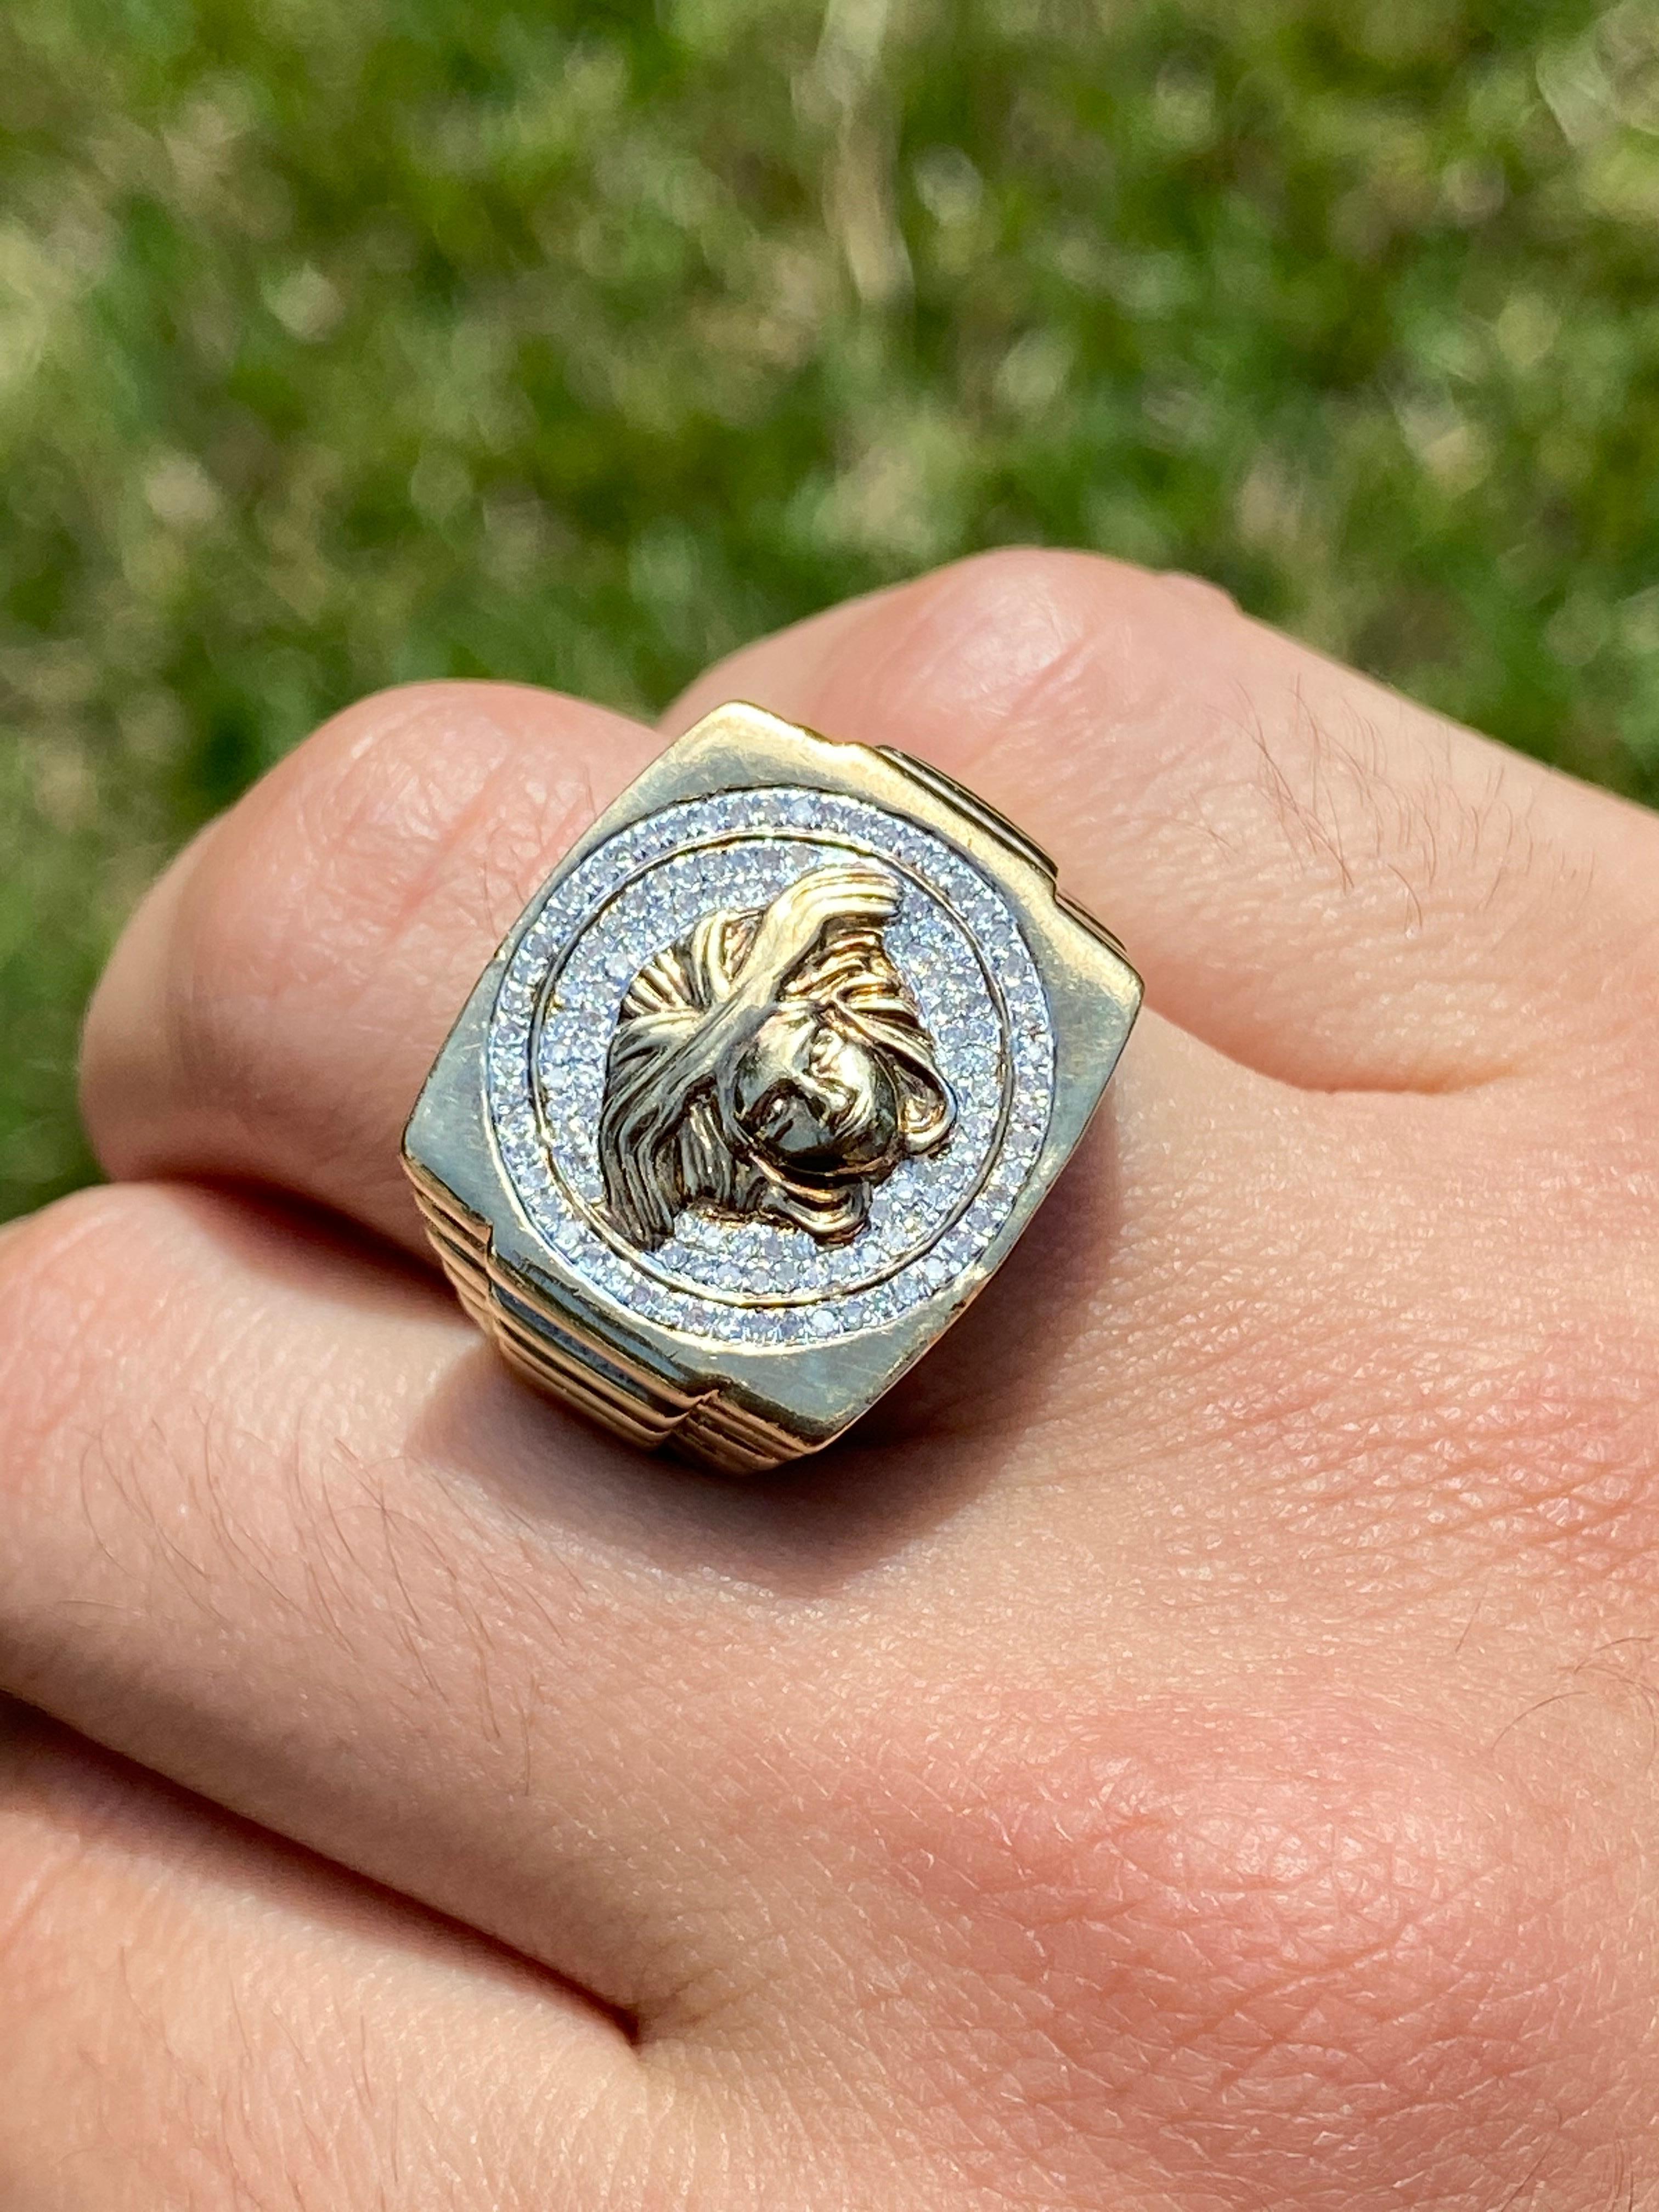 10k Solid Gold Diamond Men's Ring with Medusa Face In Good Condition For Sale In Miami, FL